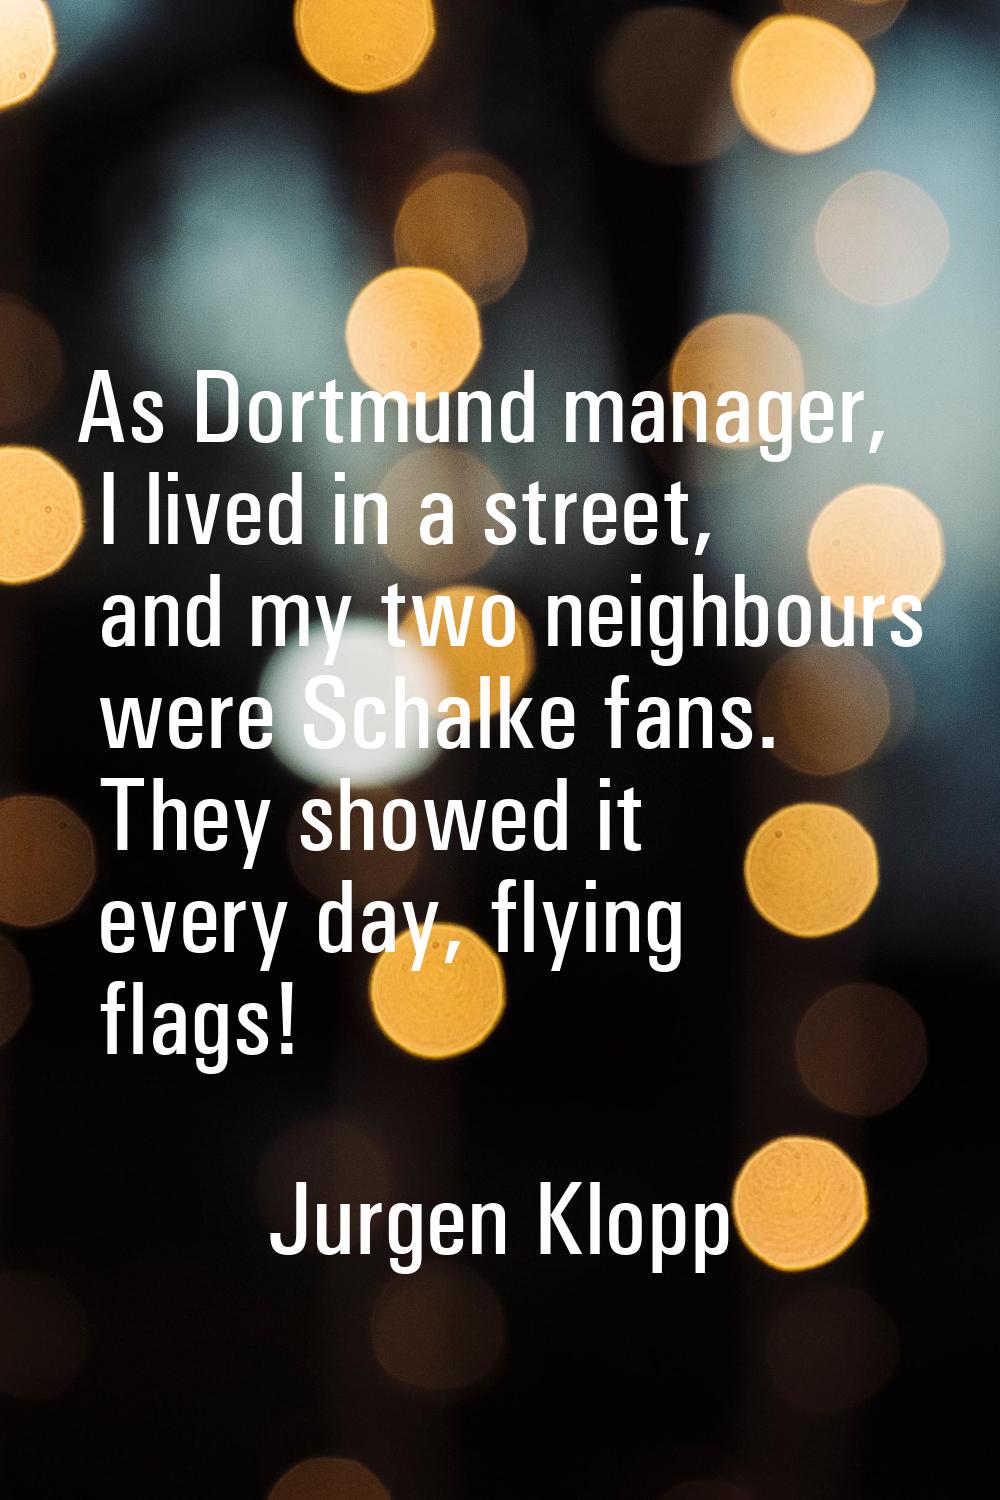 As Dortmund manager, I lived in a street, and my two neighbours were Schalke fans. They showed it e